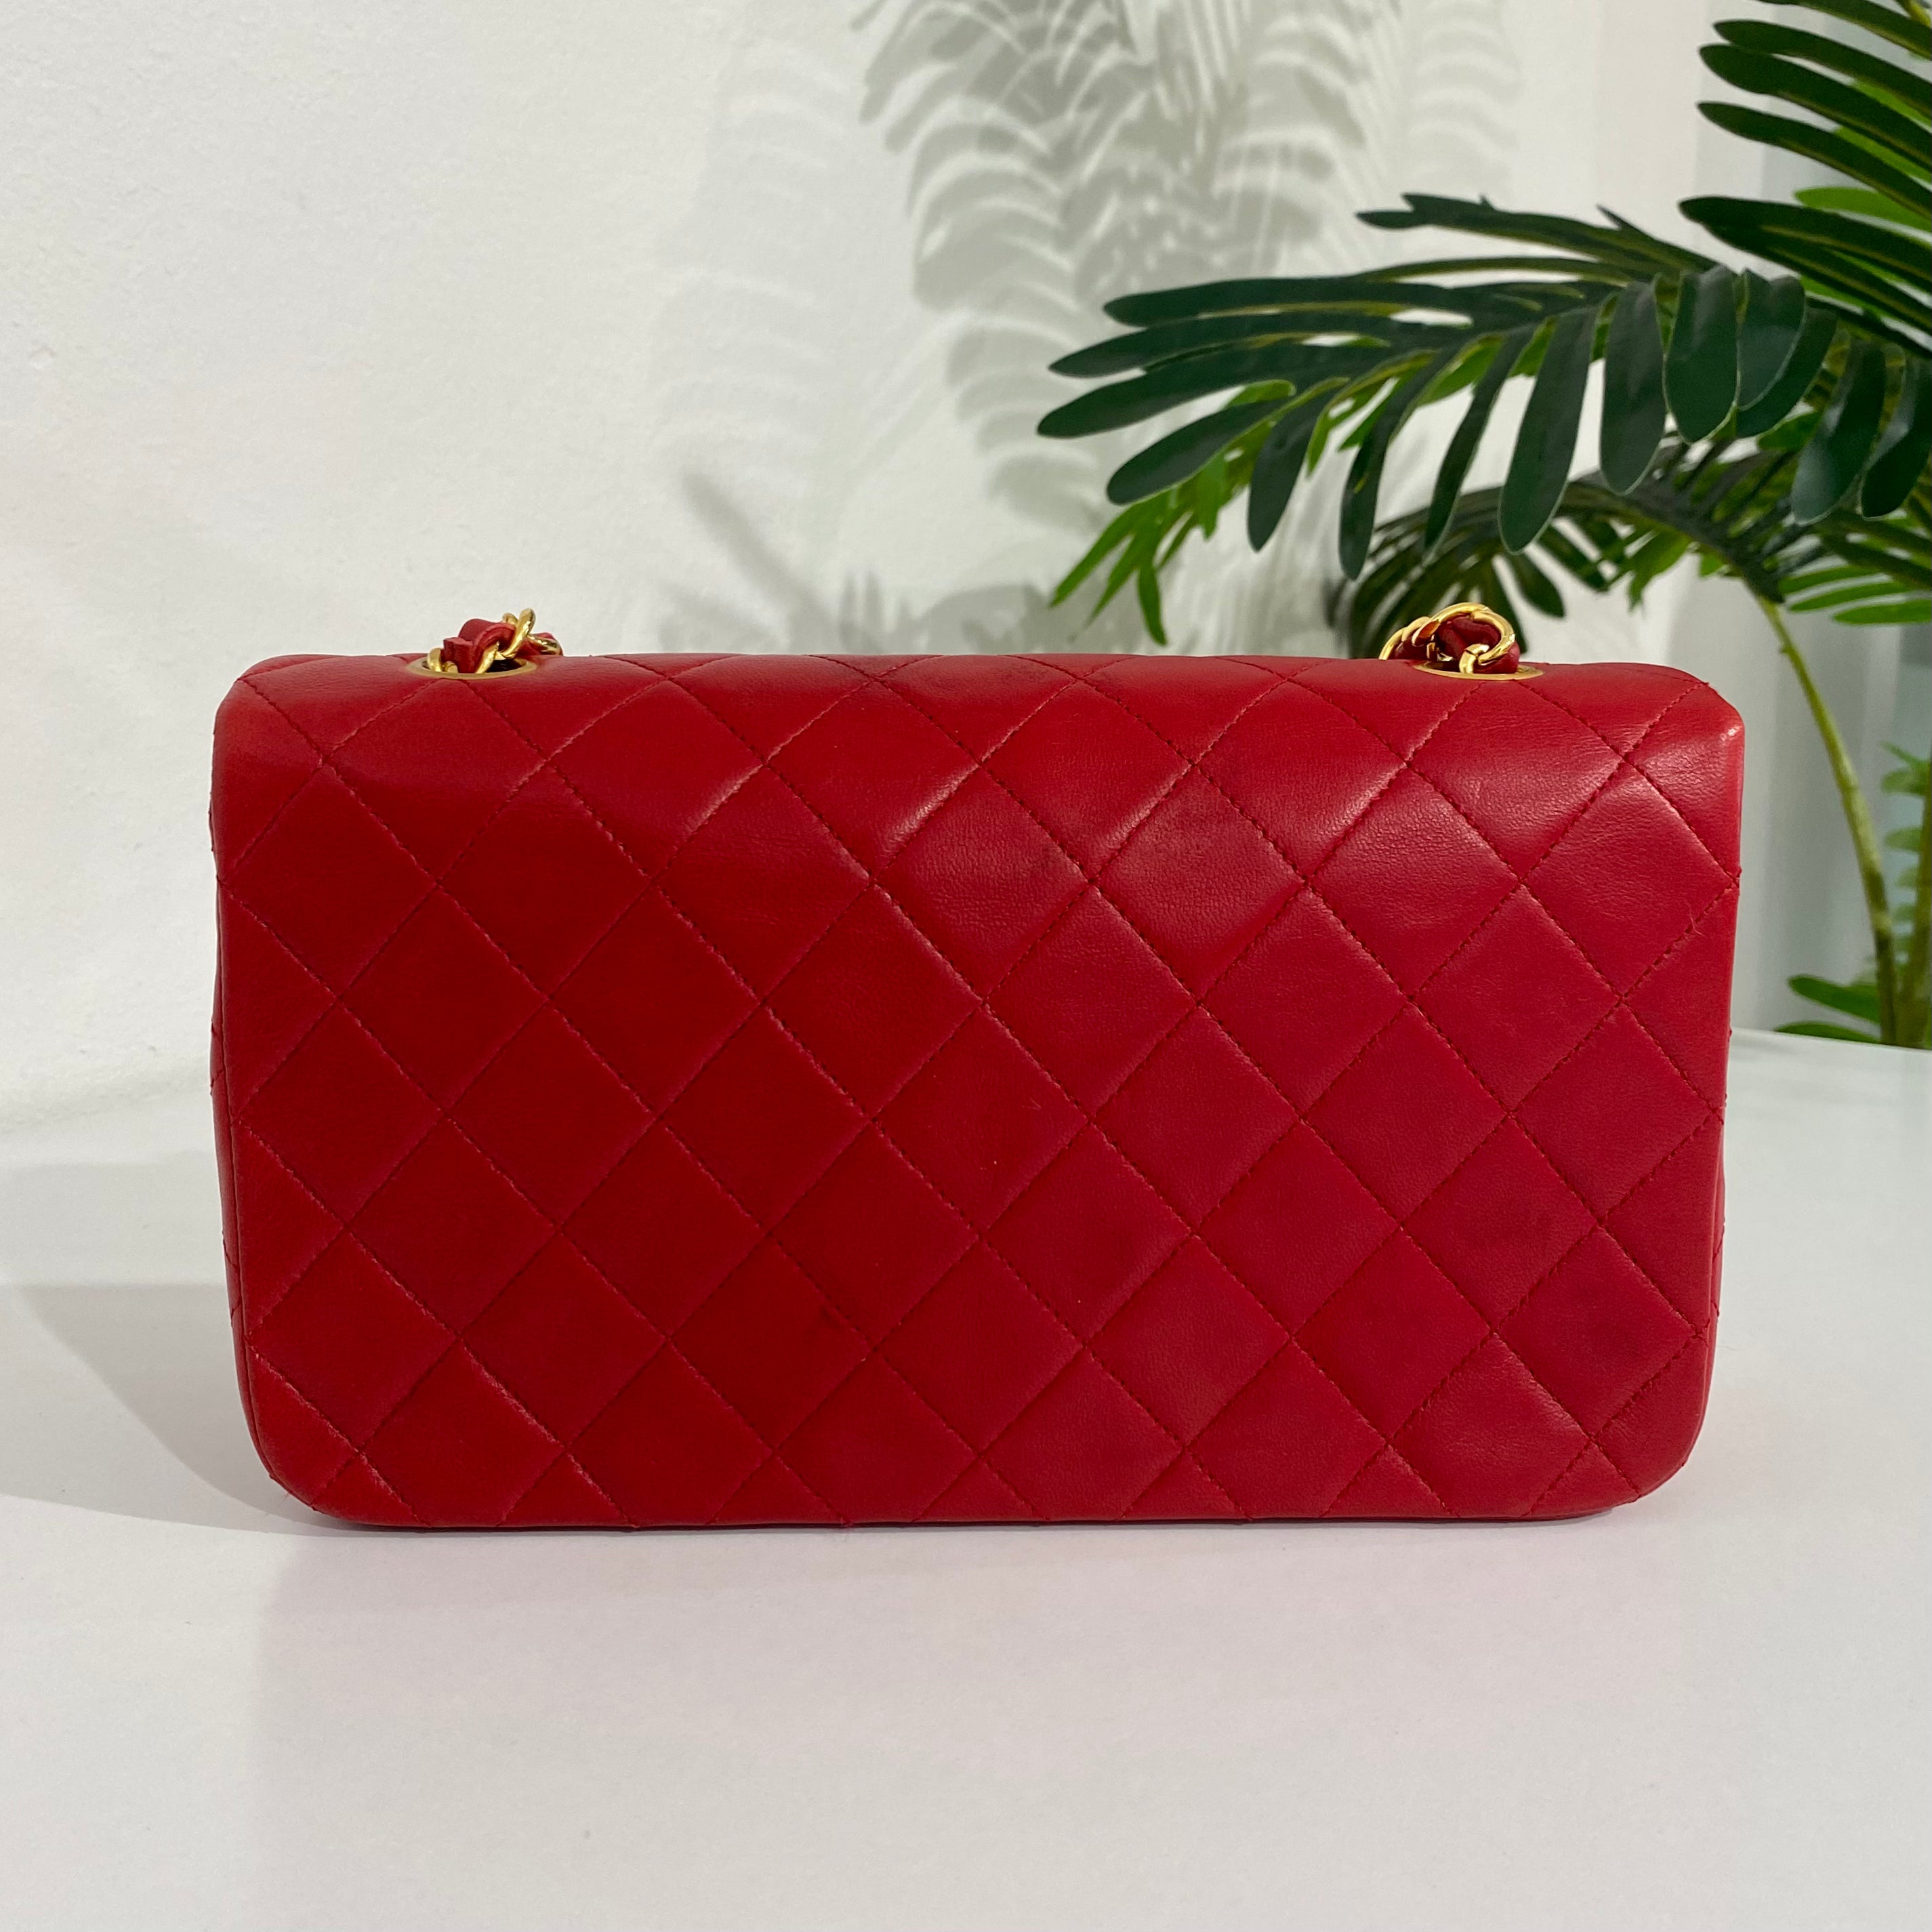 Vintage Chanel Red Maxi Classic Single Flap Bag - ASL2413